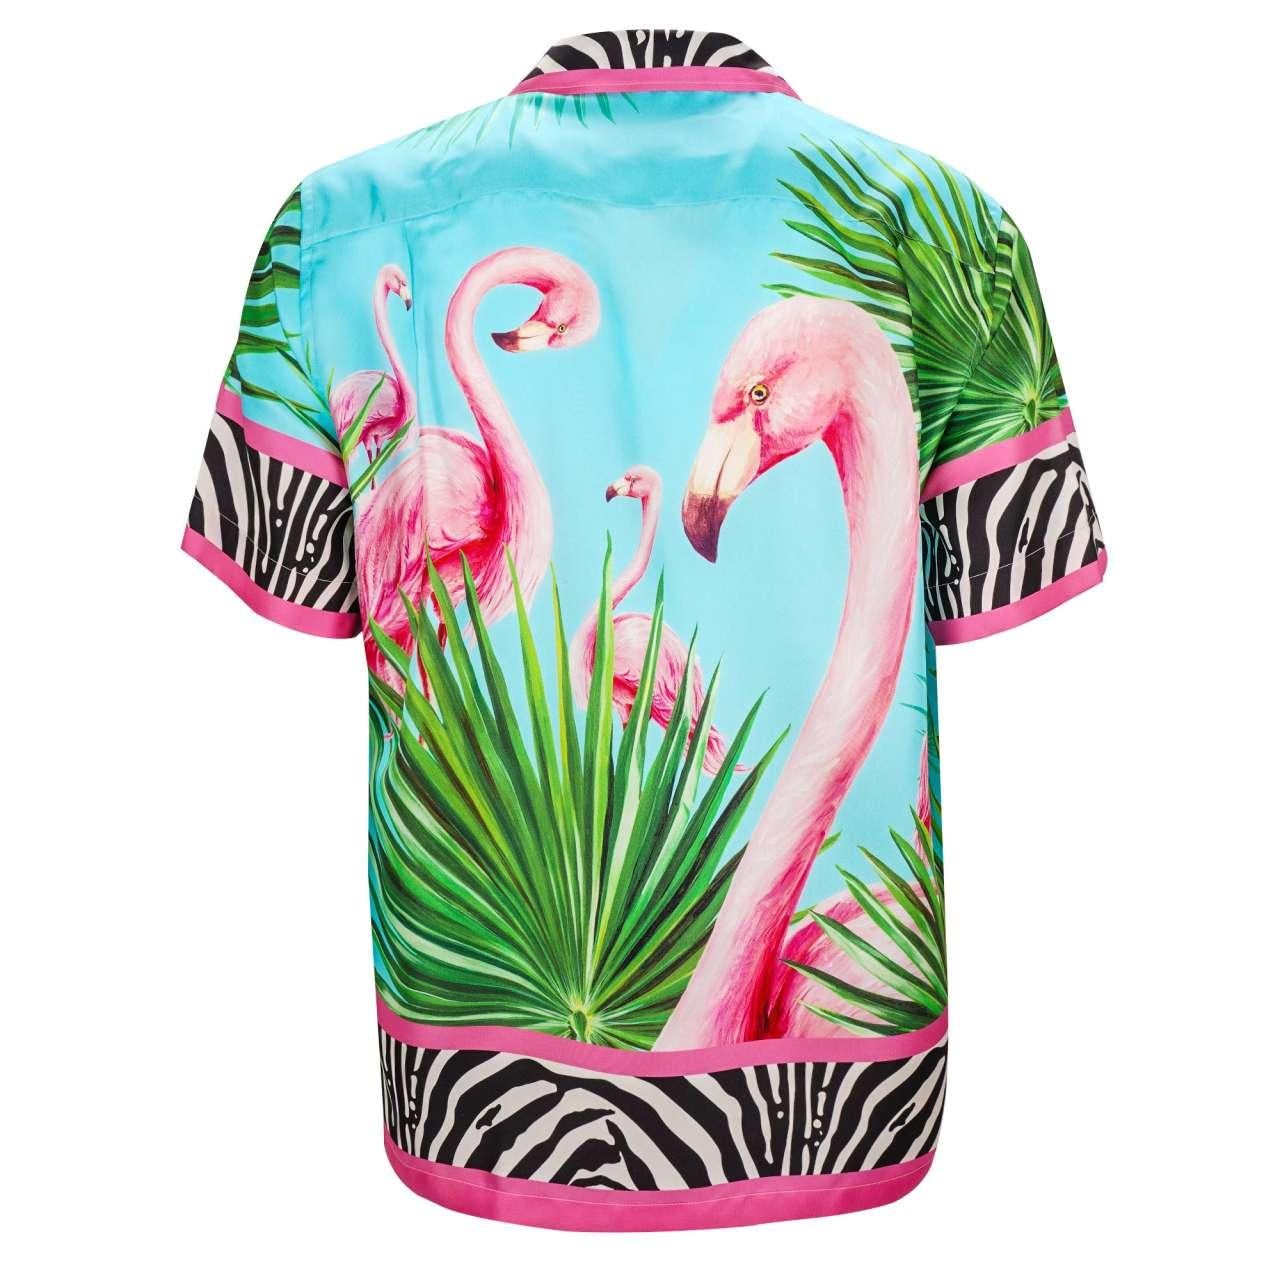 Dolce & Gabbana - DJ Khaled Silk Flamingo Zebra Shirt with Sunglasses and CD 38 In Excellent Condition For Sale In Erkrath, DE